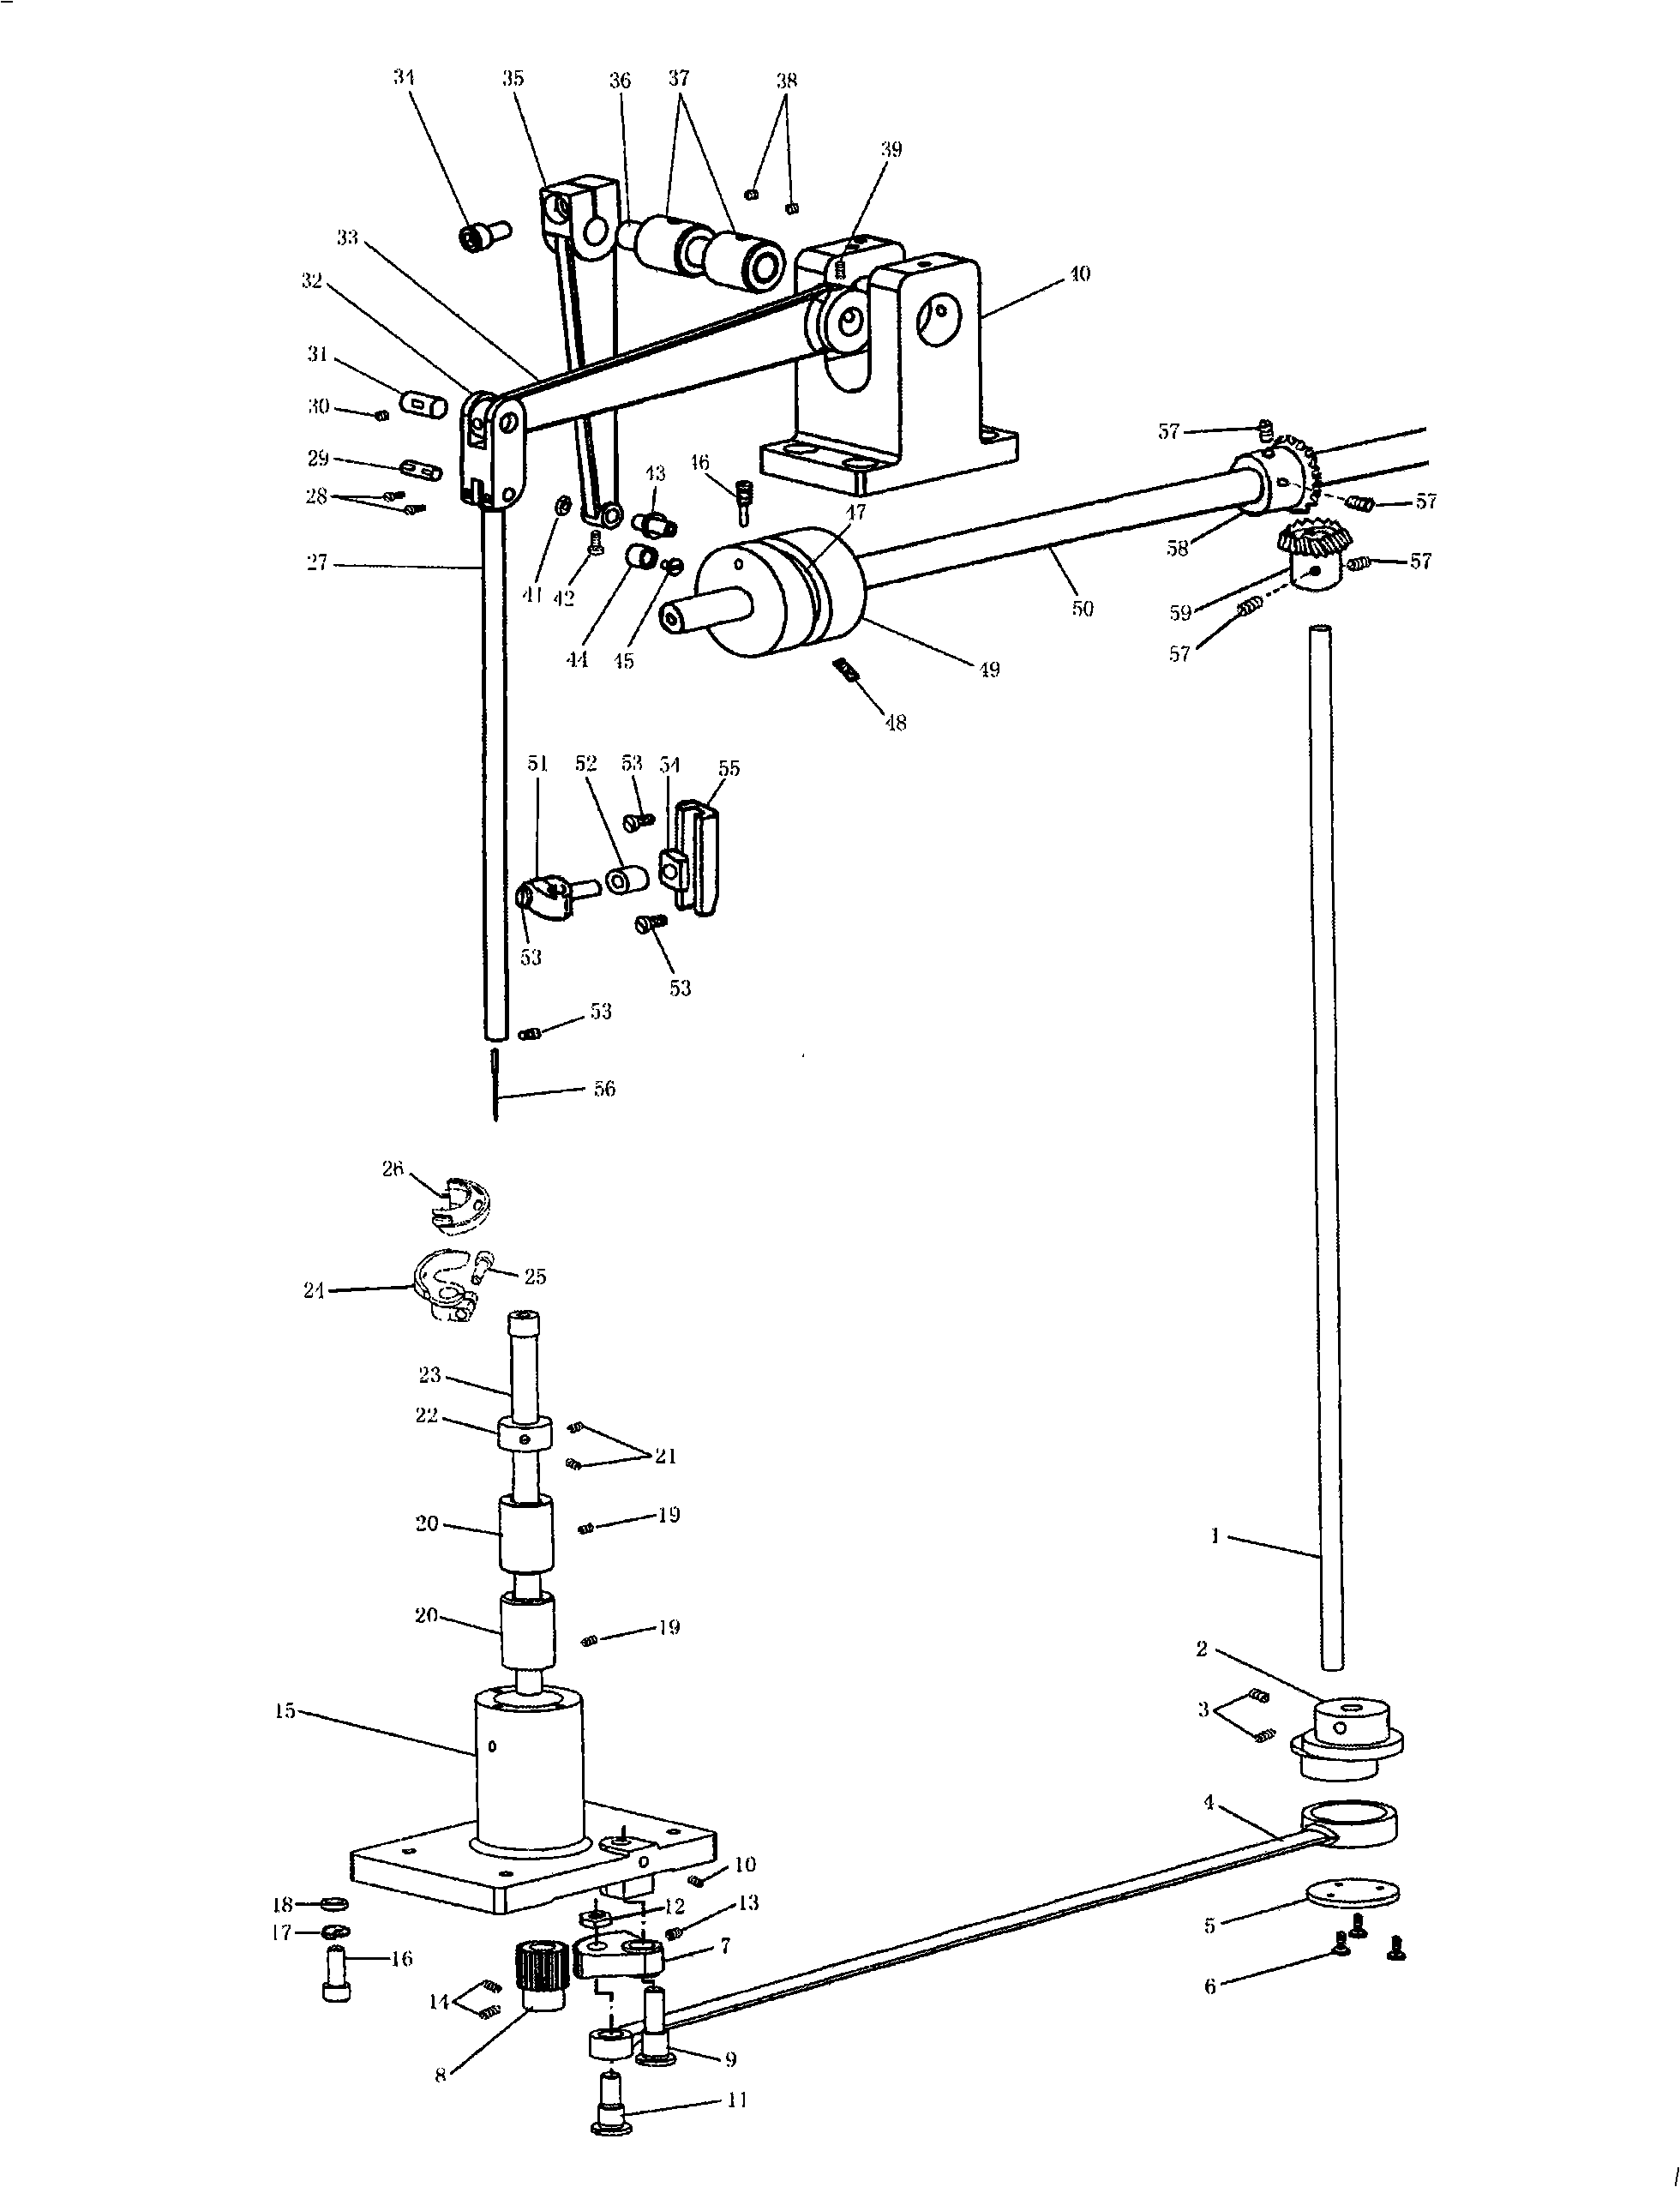 Needle bar and thread hooking assembly of sewing machine